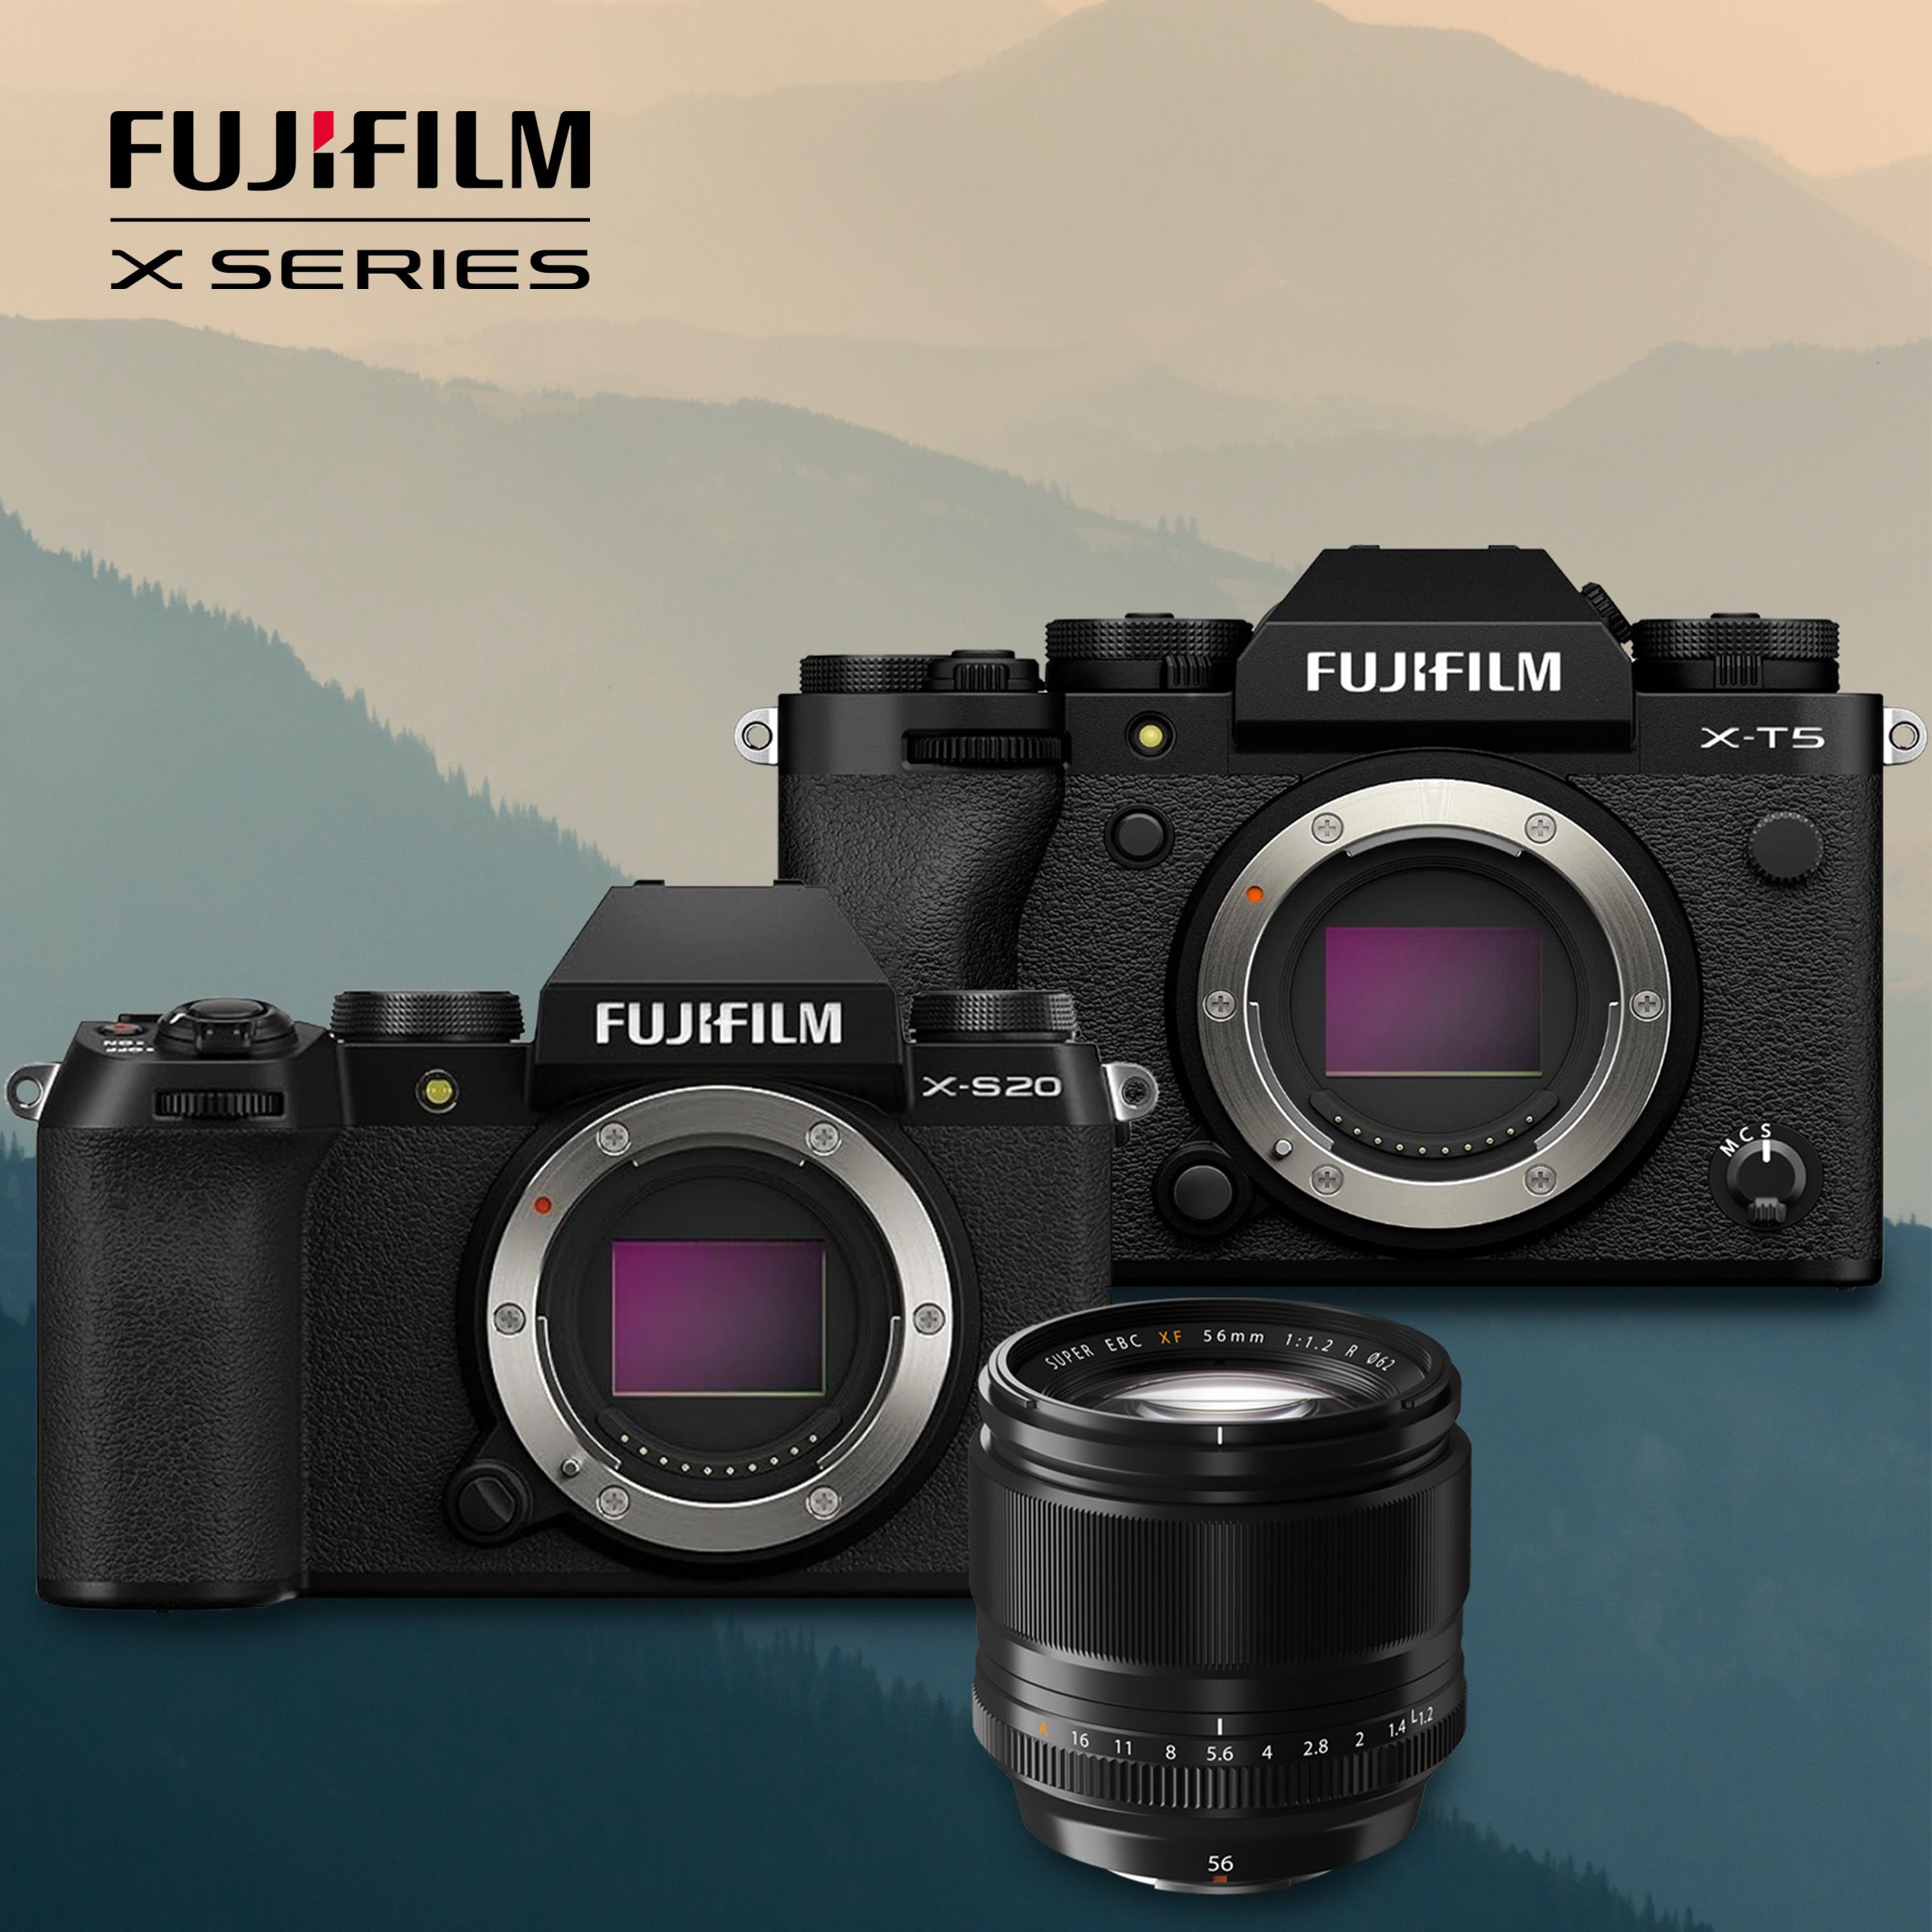 Create with confidence.  Make great savings this festive season with FUJIFILM X Series cameras and lenses.